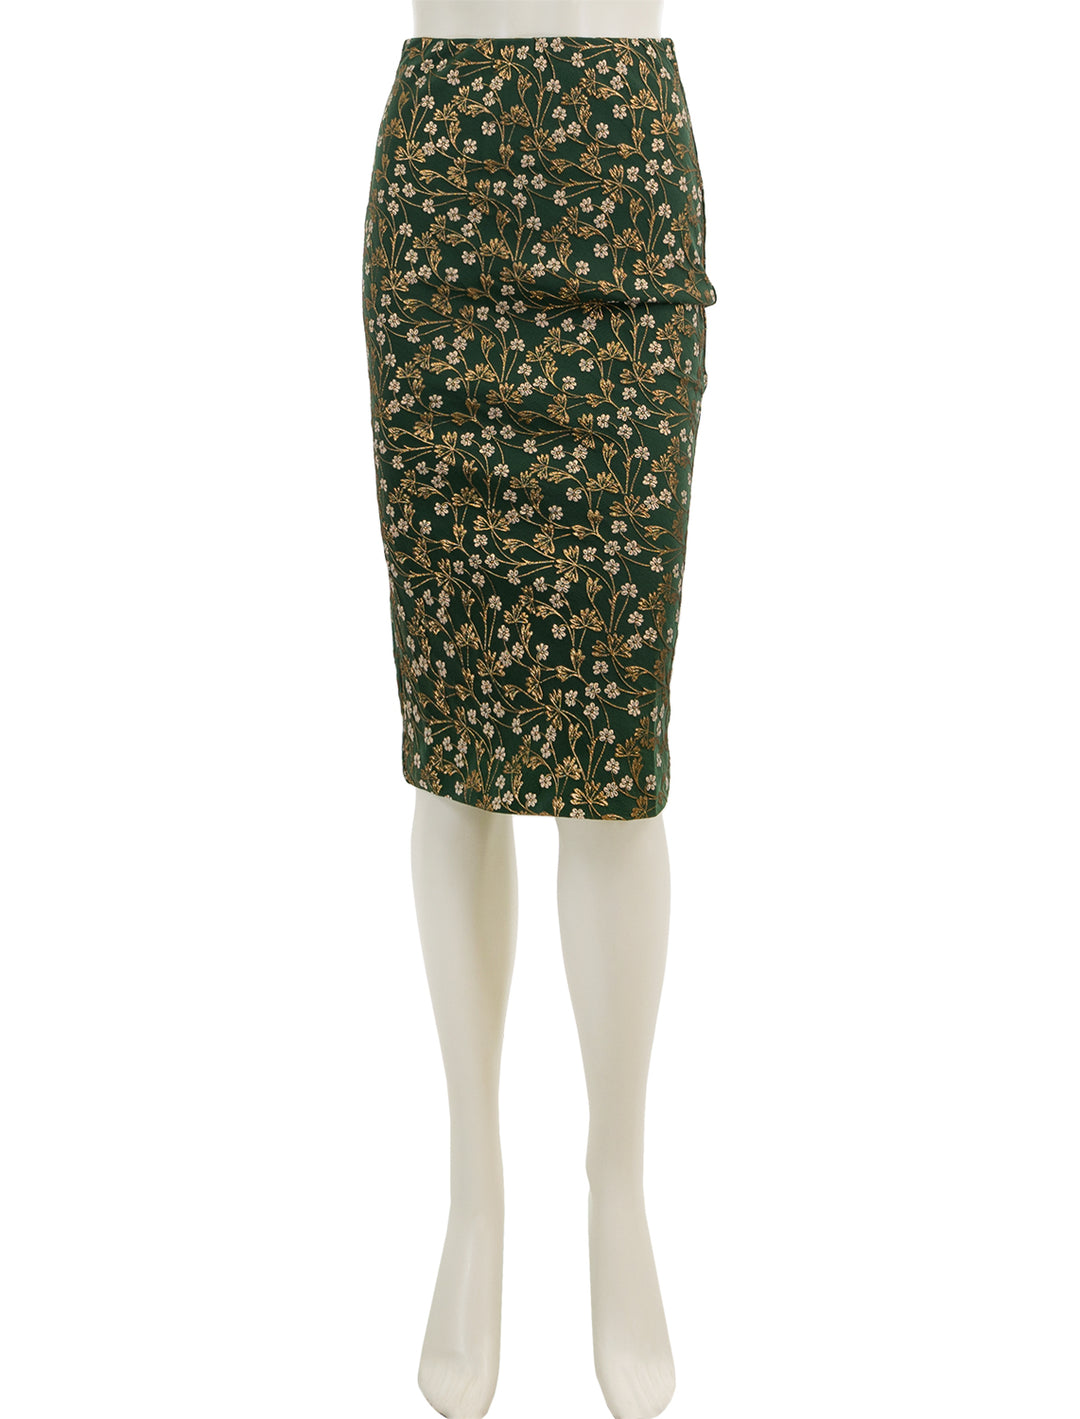 Front view of Ann Mashburn's pull-on skirt in hunter and gold jacquard.